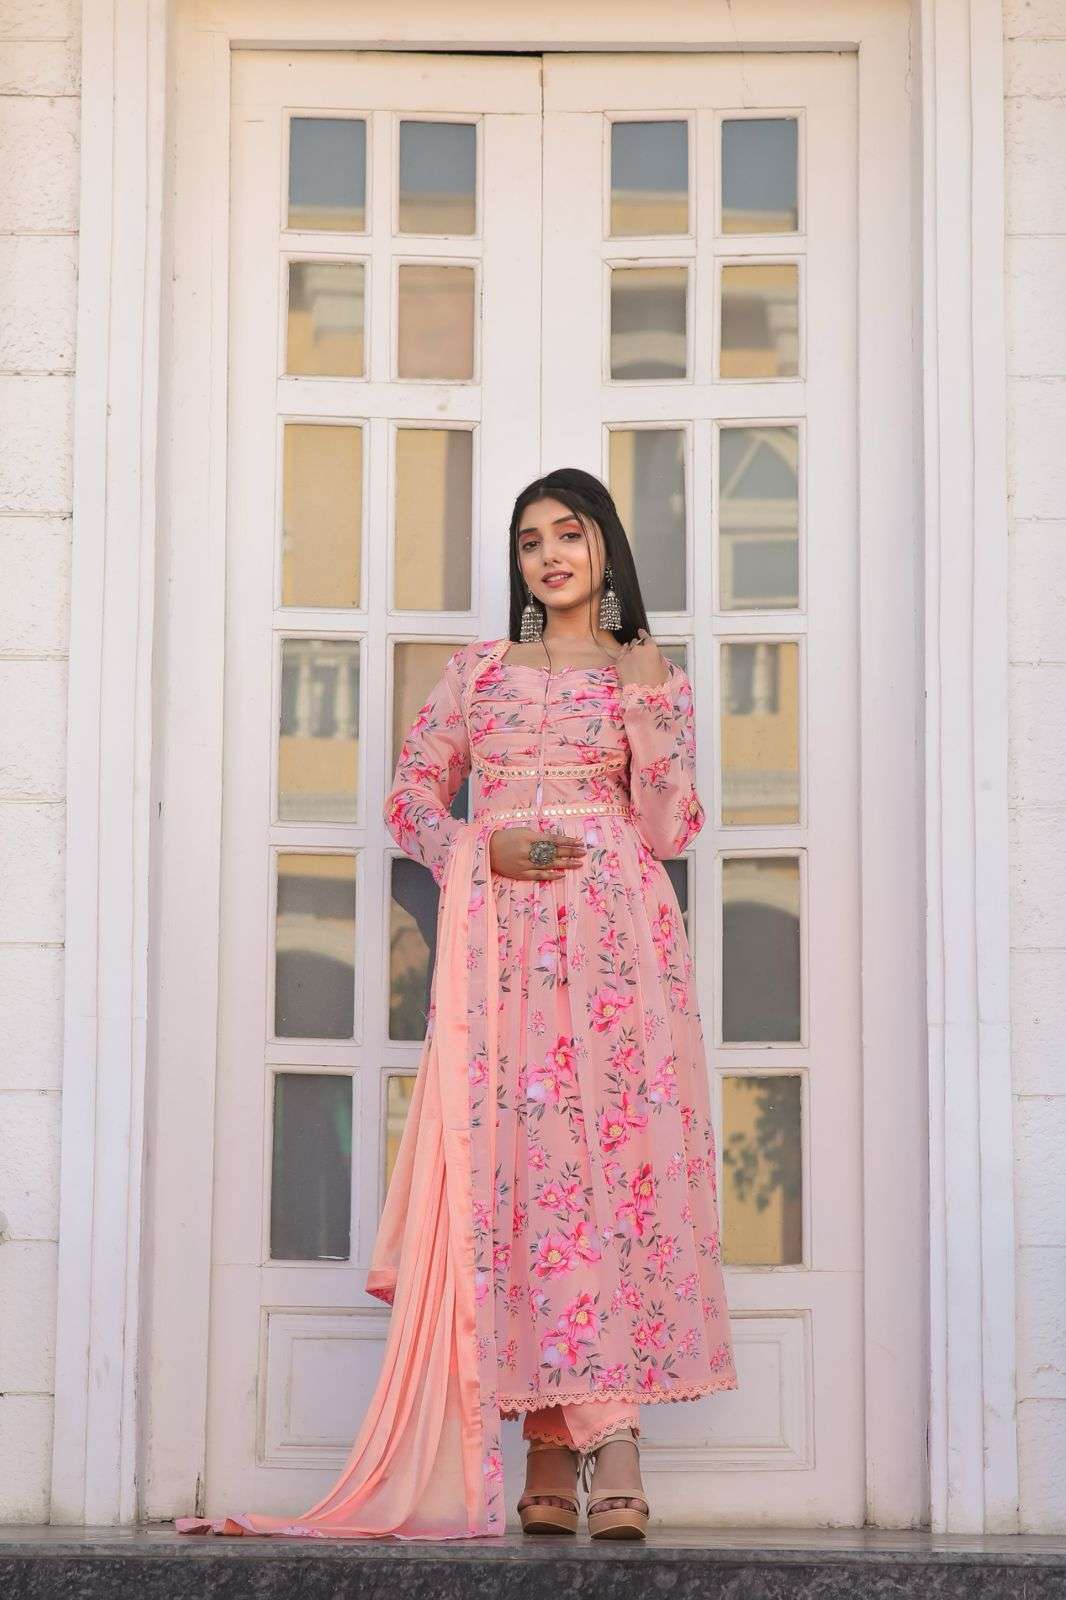 fvd launching new sp ramdan collecion inn multicoloured anarkali with mirror work and print lace featuring soothing yet chinnon  print and full lining with printed pant and ciffon dupatta with printed lace